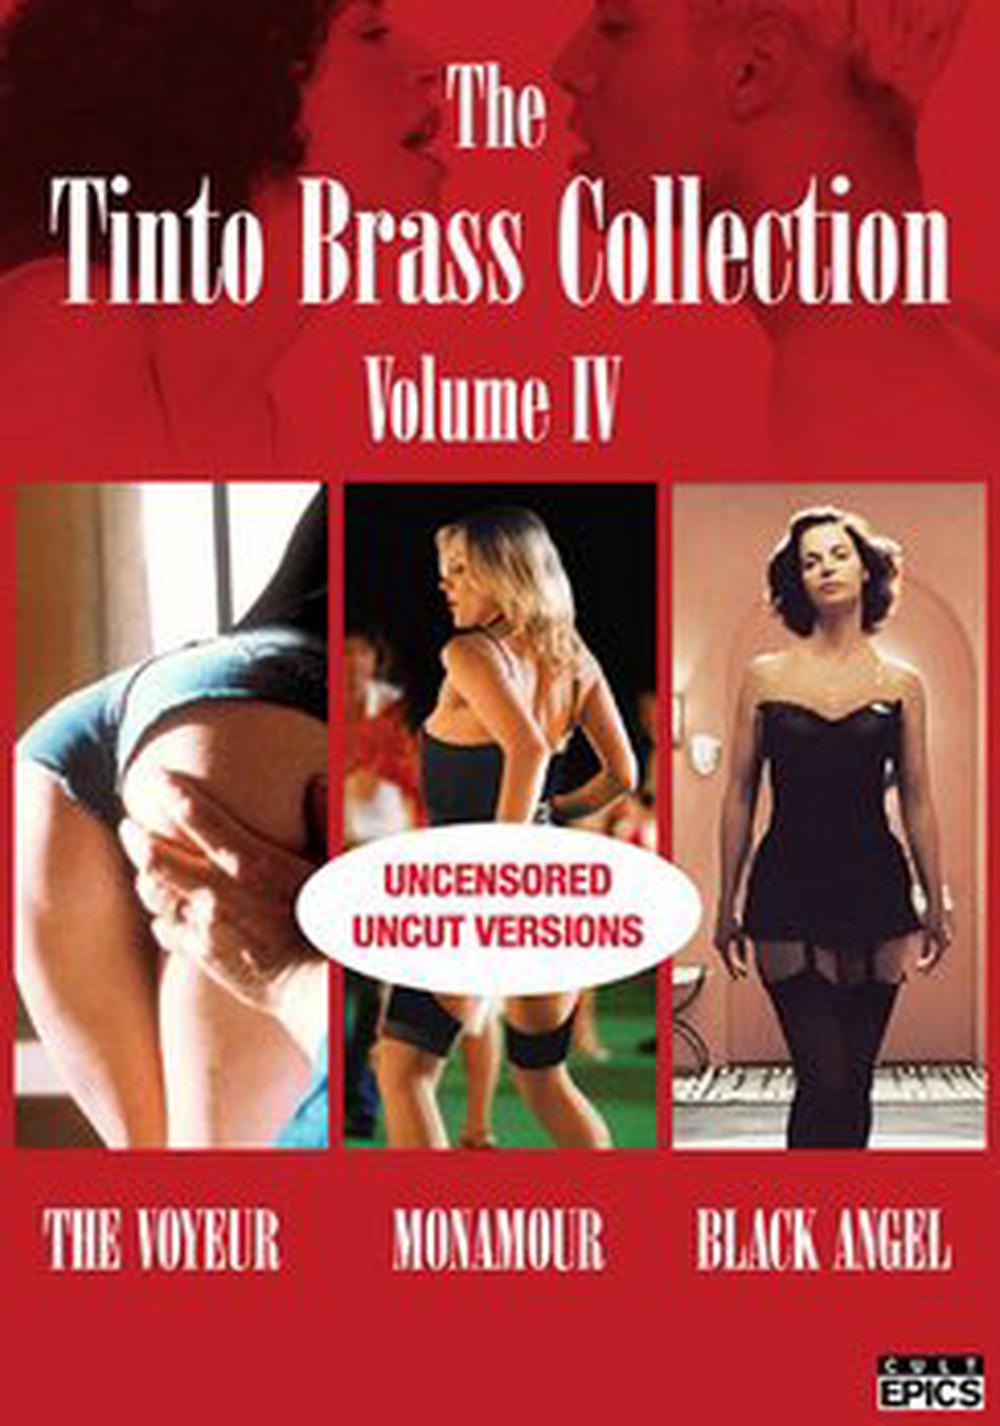 Tinto Brass Collection Vol 4 Dvd Buy Online At The Nile